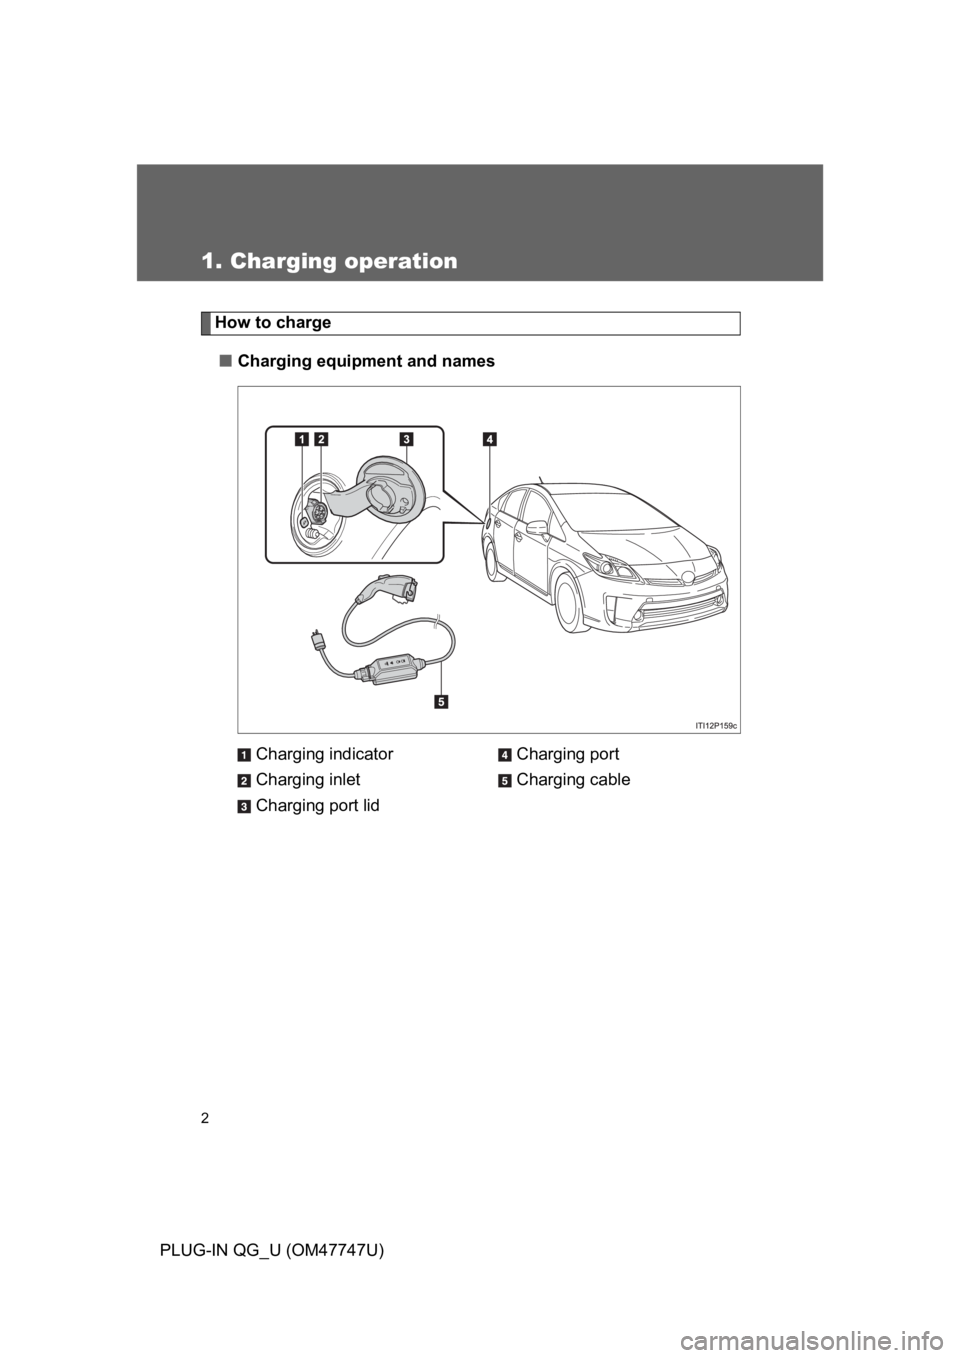 TOYOTA PRIUS PLUG-IN 2012  Owners Manual 2
PLUG-IN QG_U (OM47747U)
1. Charging operation
How to charge
■Charging equipment and names
Charging indicator
Charging inlet
Charging port lid
Charging port
Charging cable 